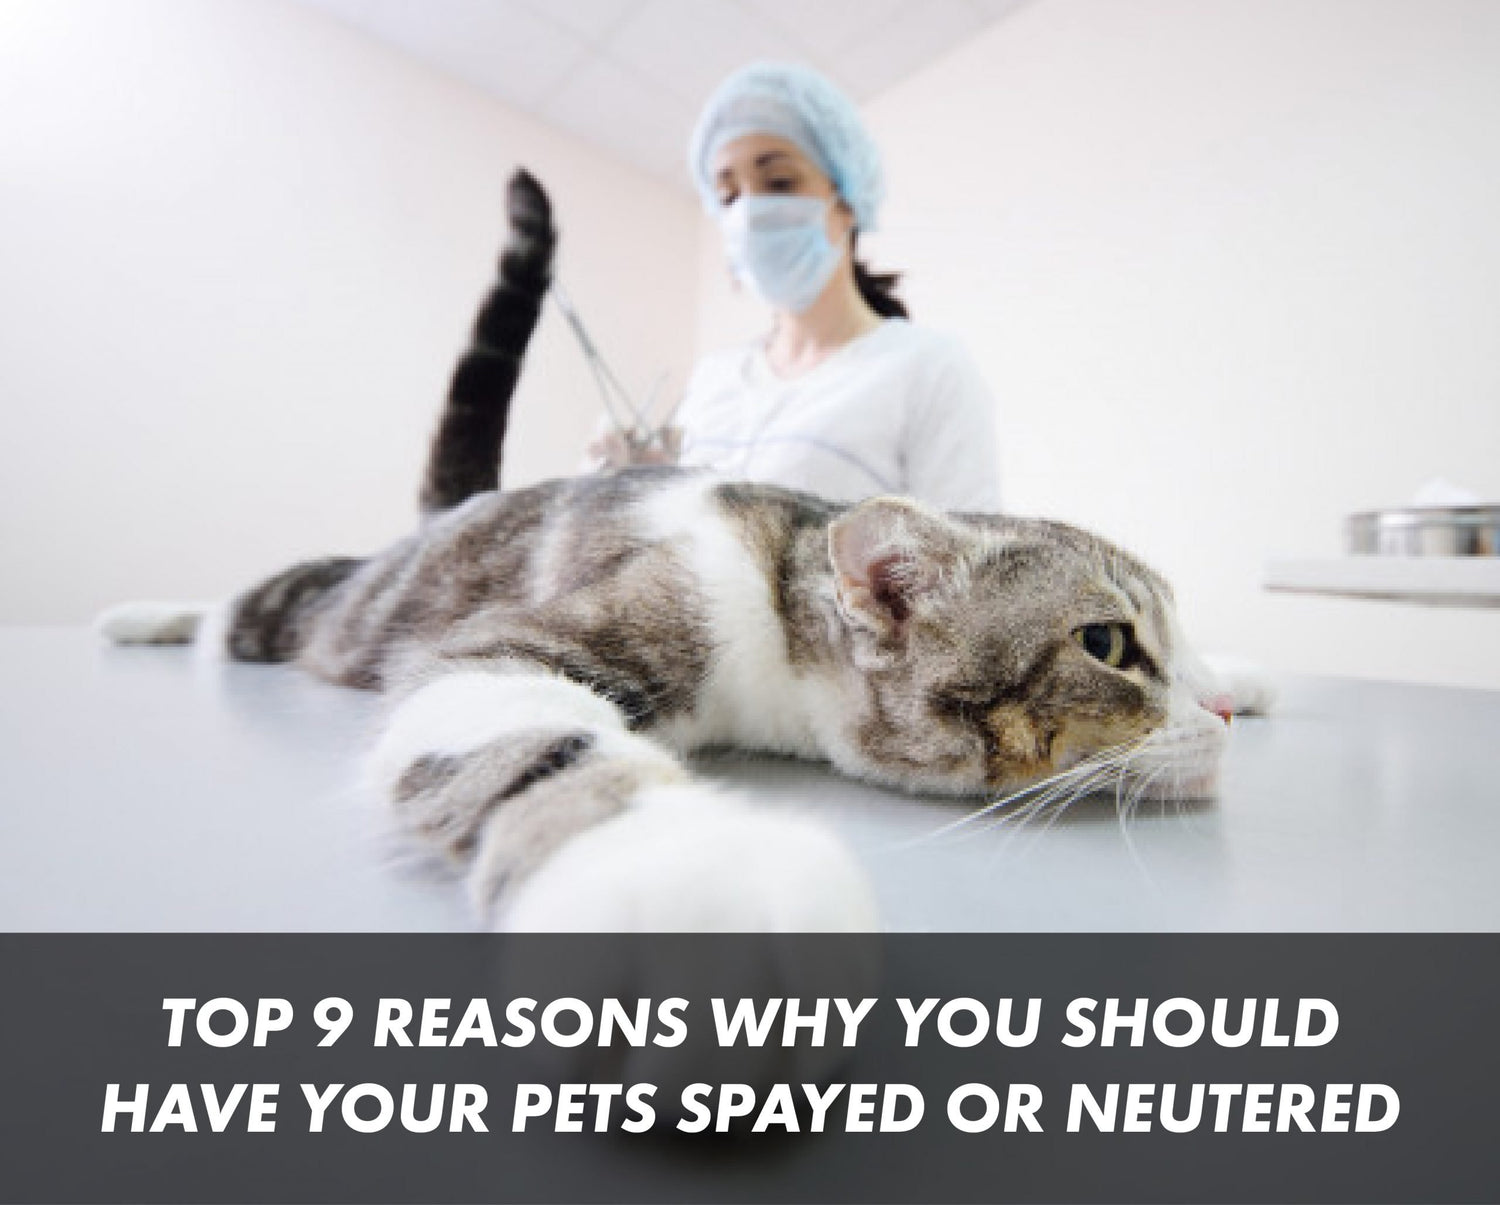 Top 9 Reasons Why You Should Have Your Pets Spayed or Neutered